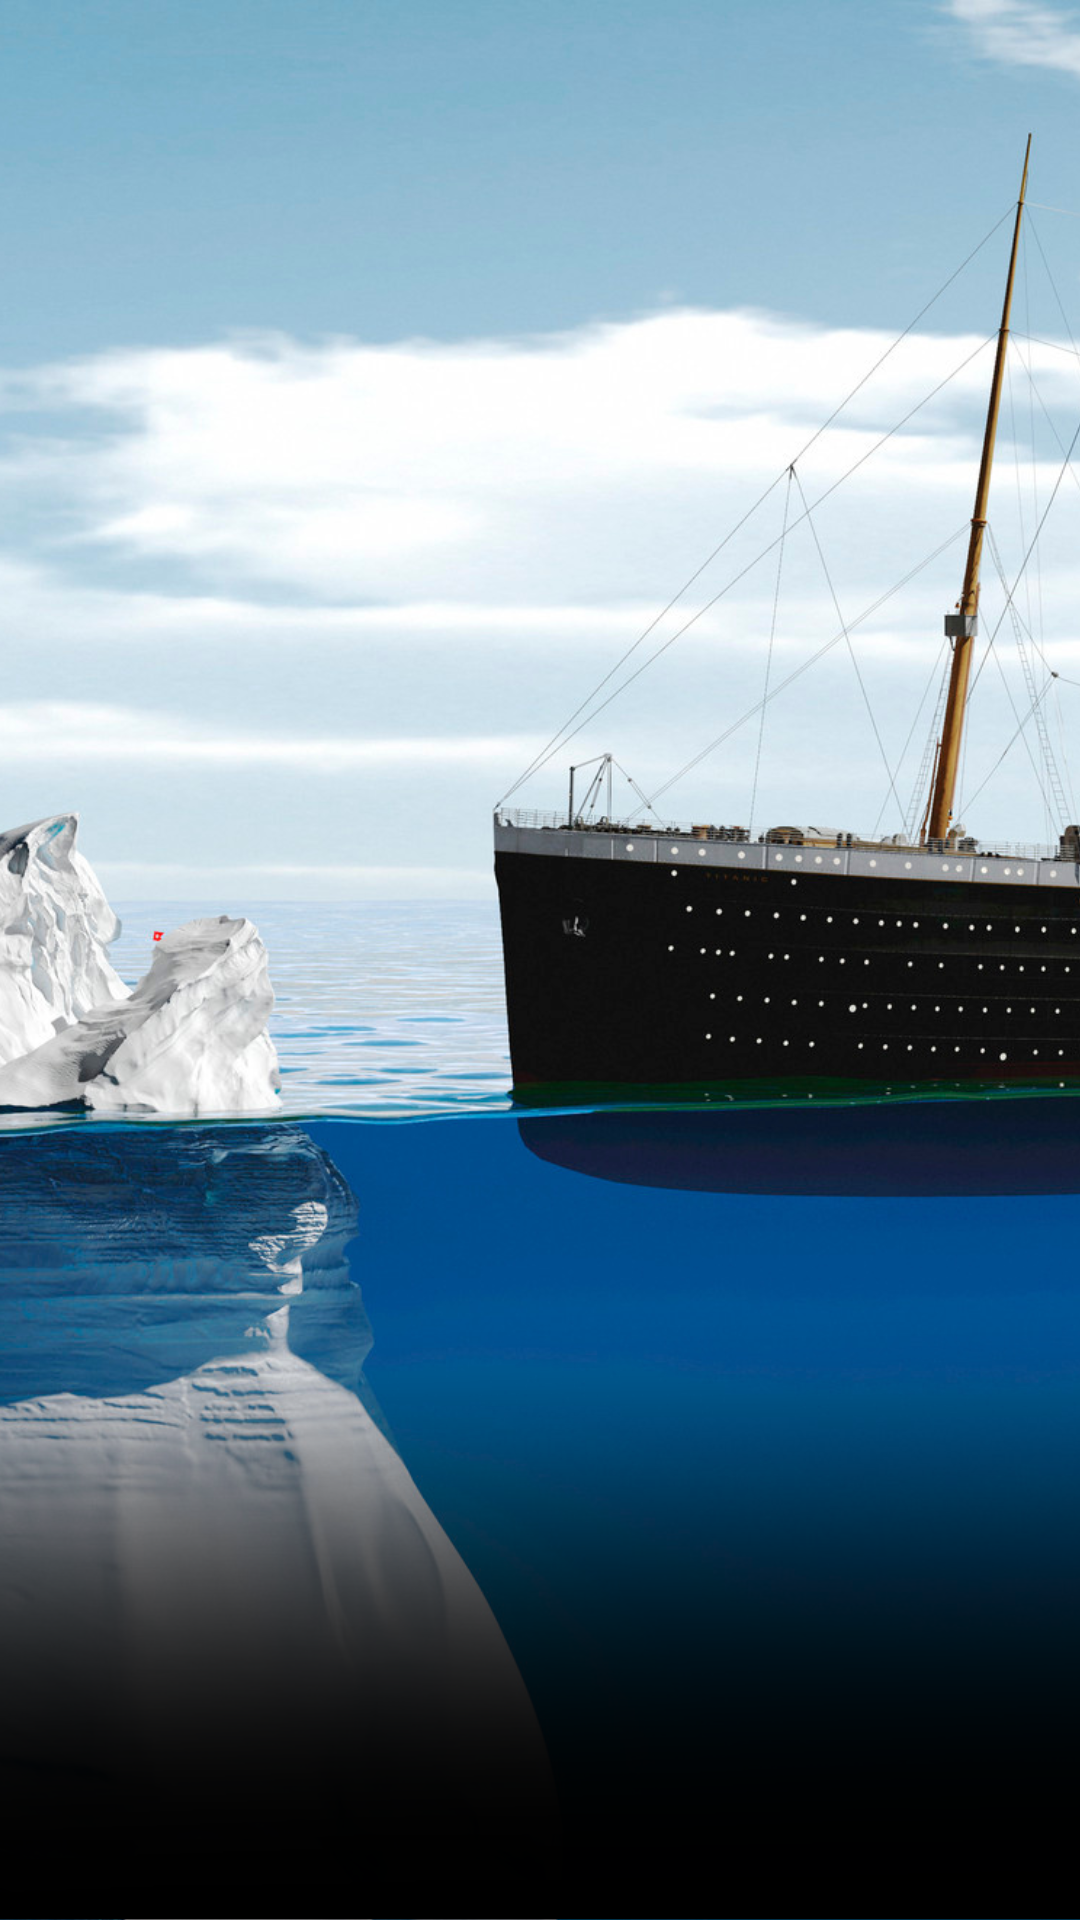 Why The 'Unsinkable' Titanic Sunk?